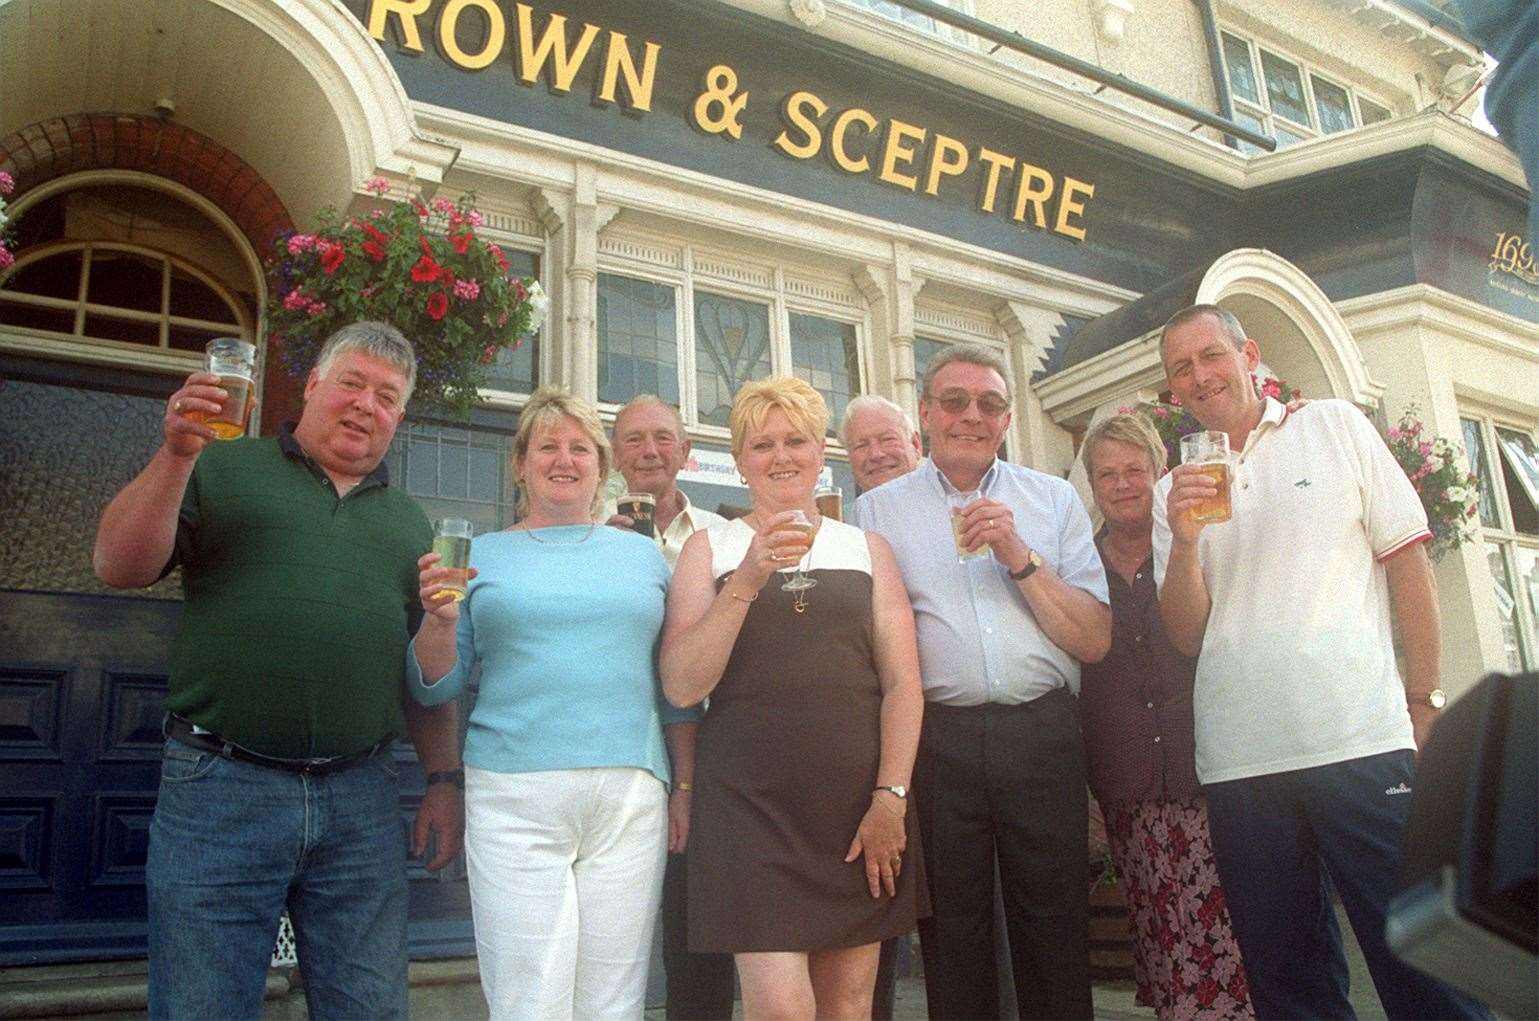 Staff celebrated the 100th anniversary of the Crown and Sceptre pub in Dover in July 2002. Twenty years on, the pub is still going strong